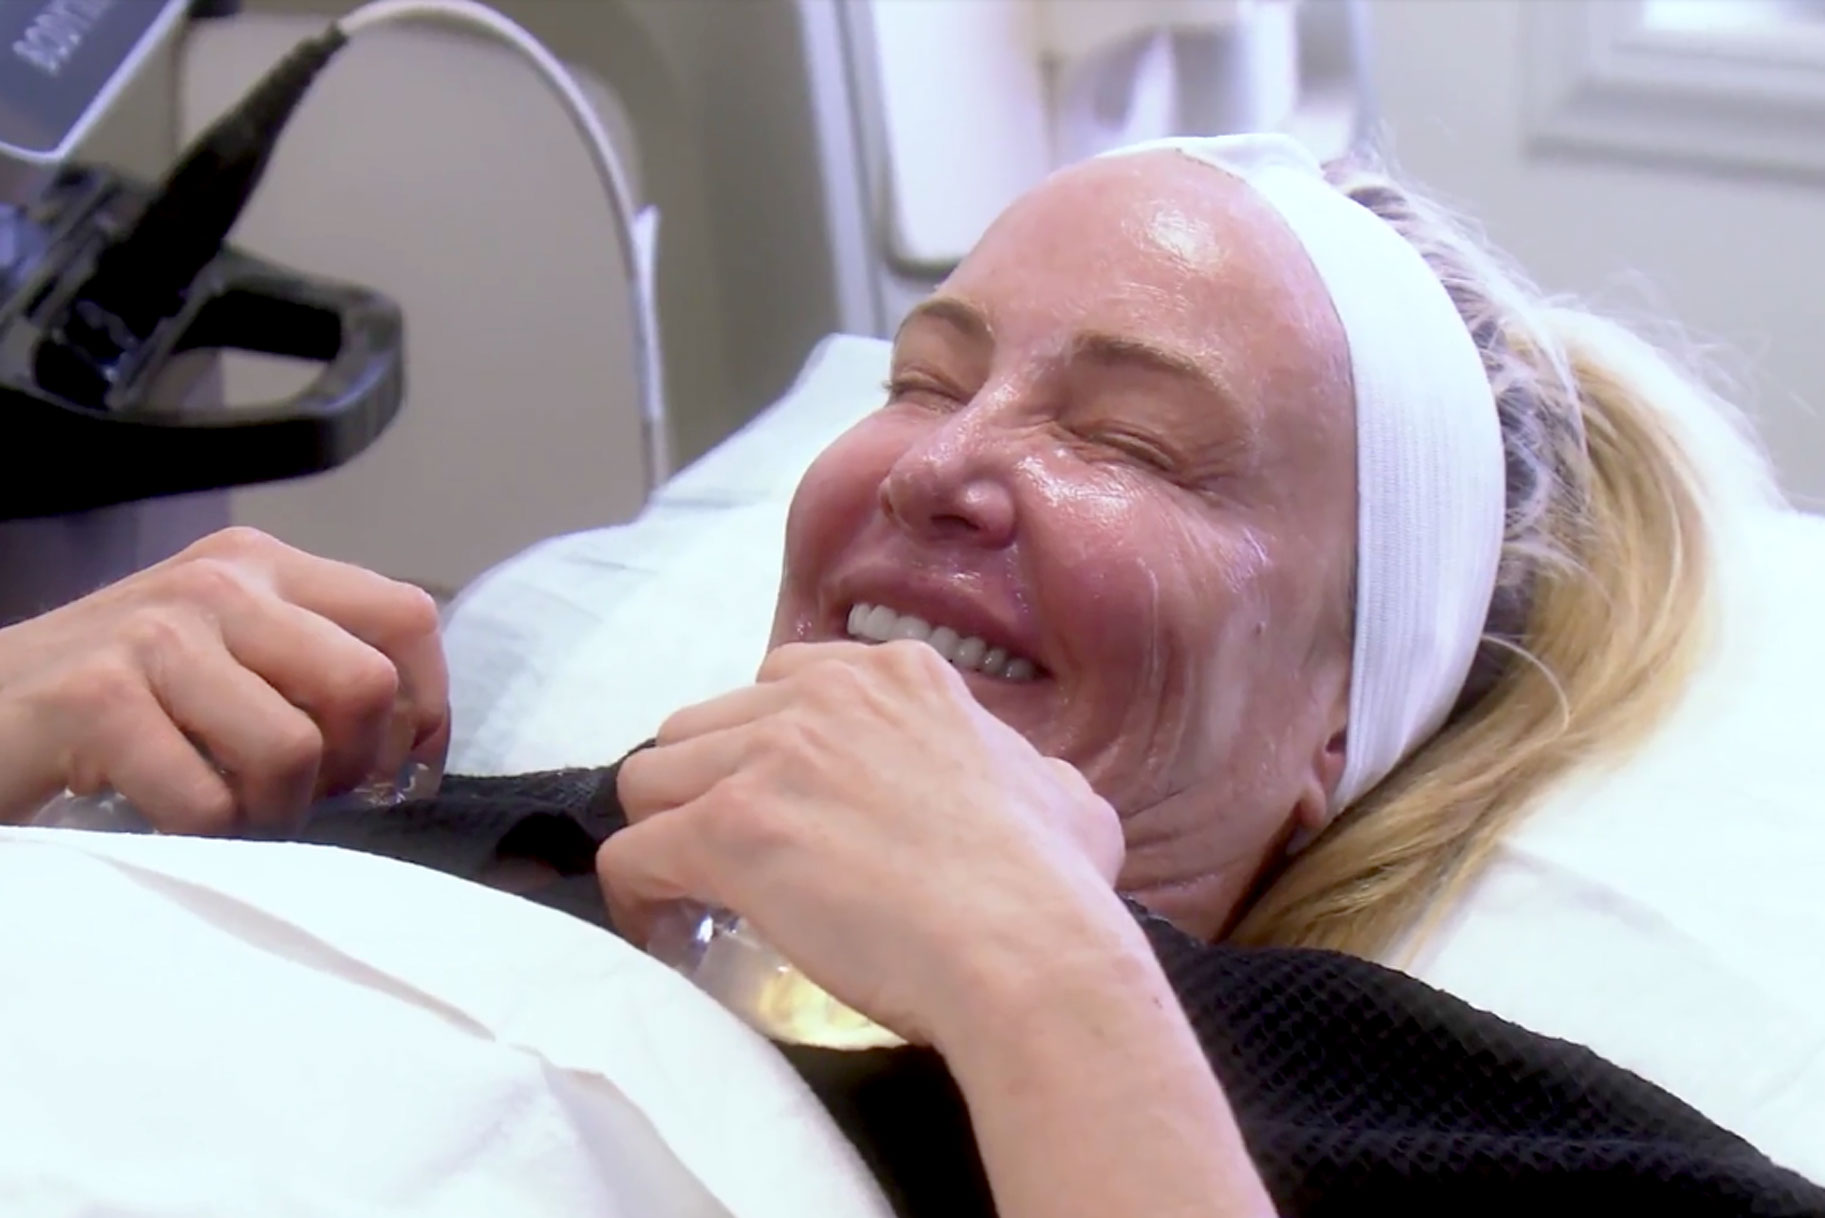 Shannon Beador Gets Orgasm O Shot in Vagina on RHOC Details Style and Living